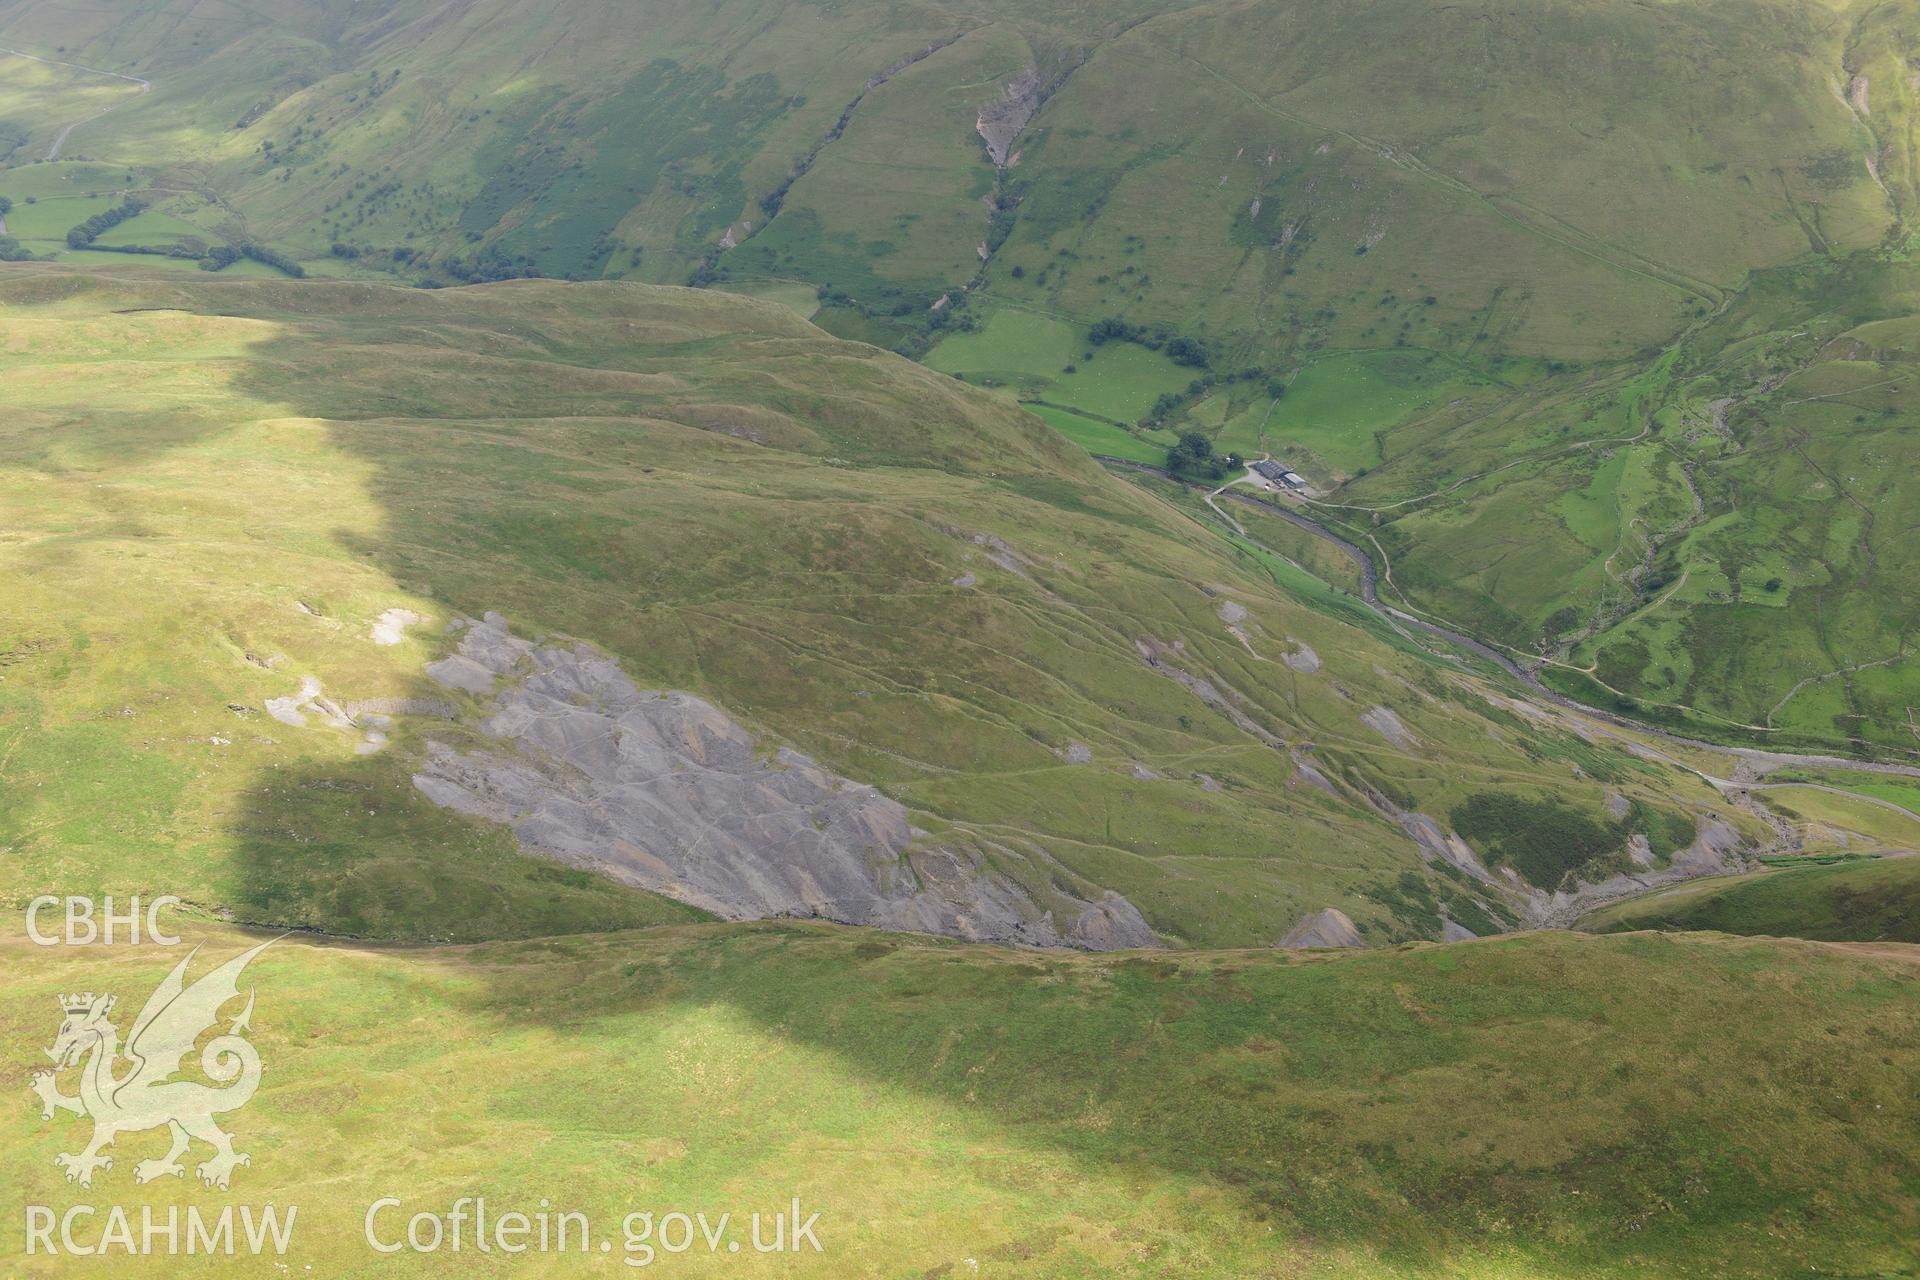 RCAHMW colour oblique photograph of Copa Hill, Cwmystwyth Lead, Copper and Zinc mines. Taken by Toby Driver on 27/07/2012.